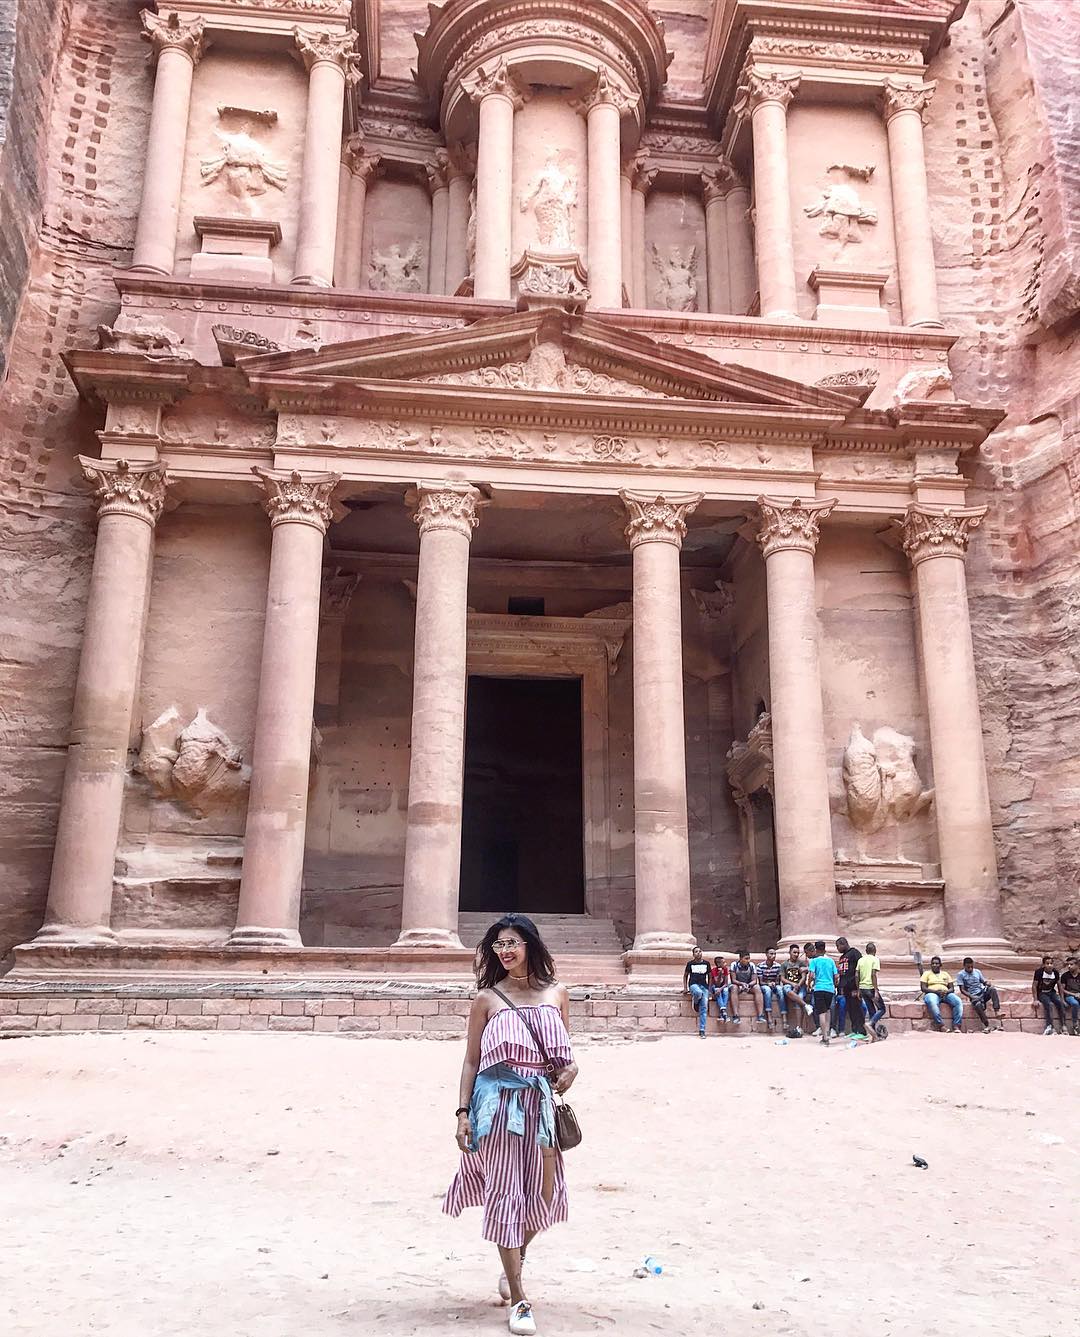 In The Lost City of Petra